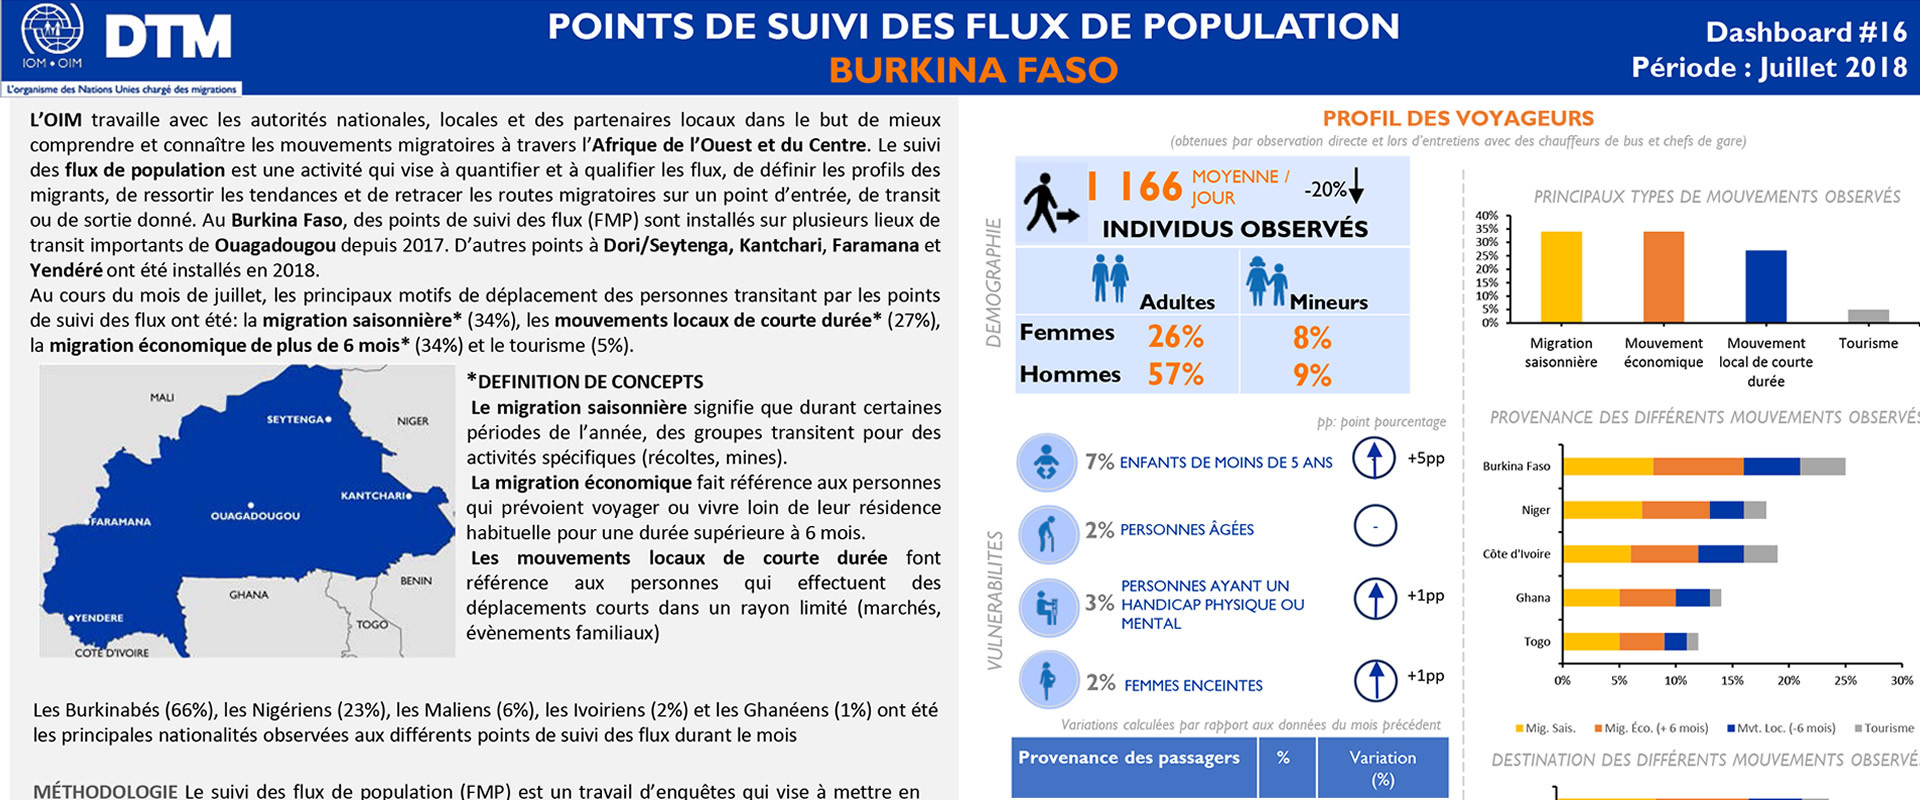 Burkina Faso - Dashboard of Population Flow Tracking Points 16 (July 2018) [French]